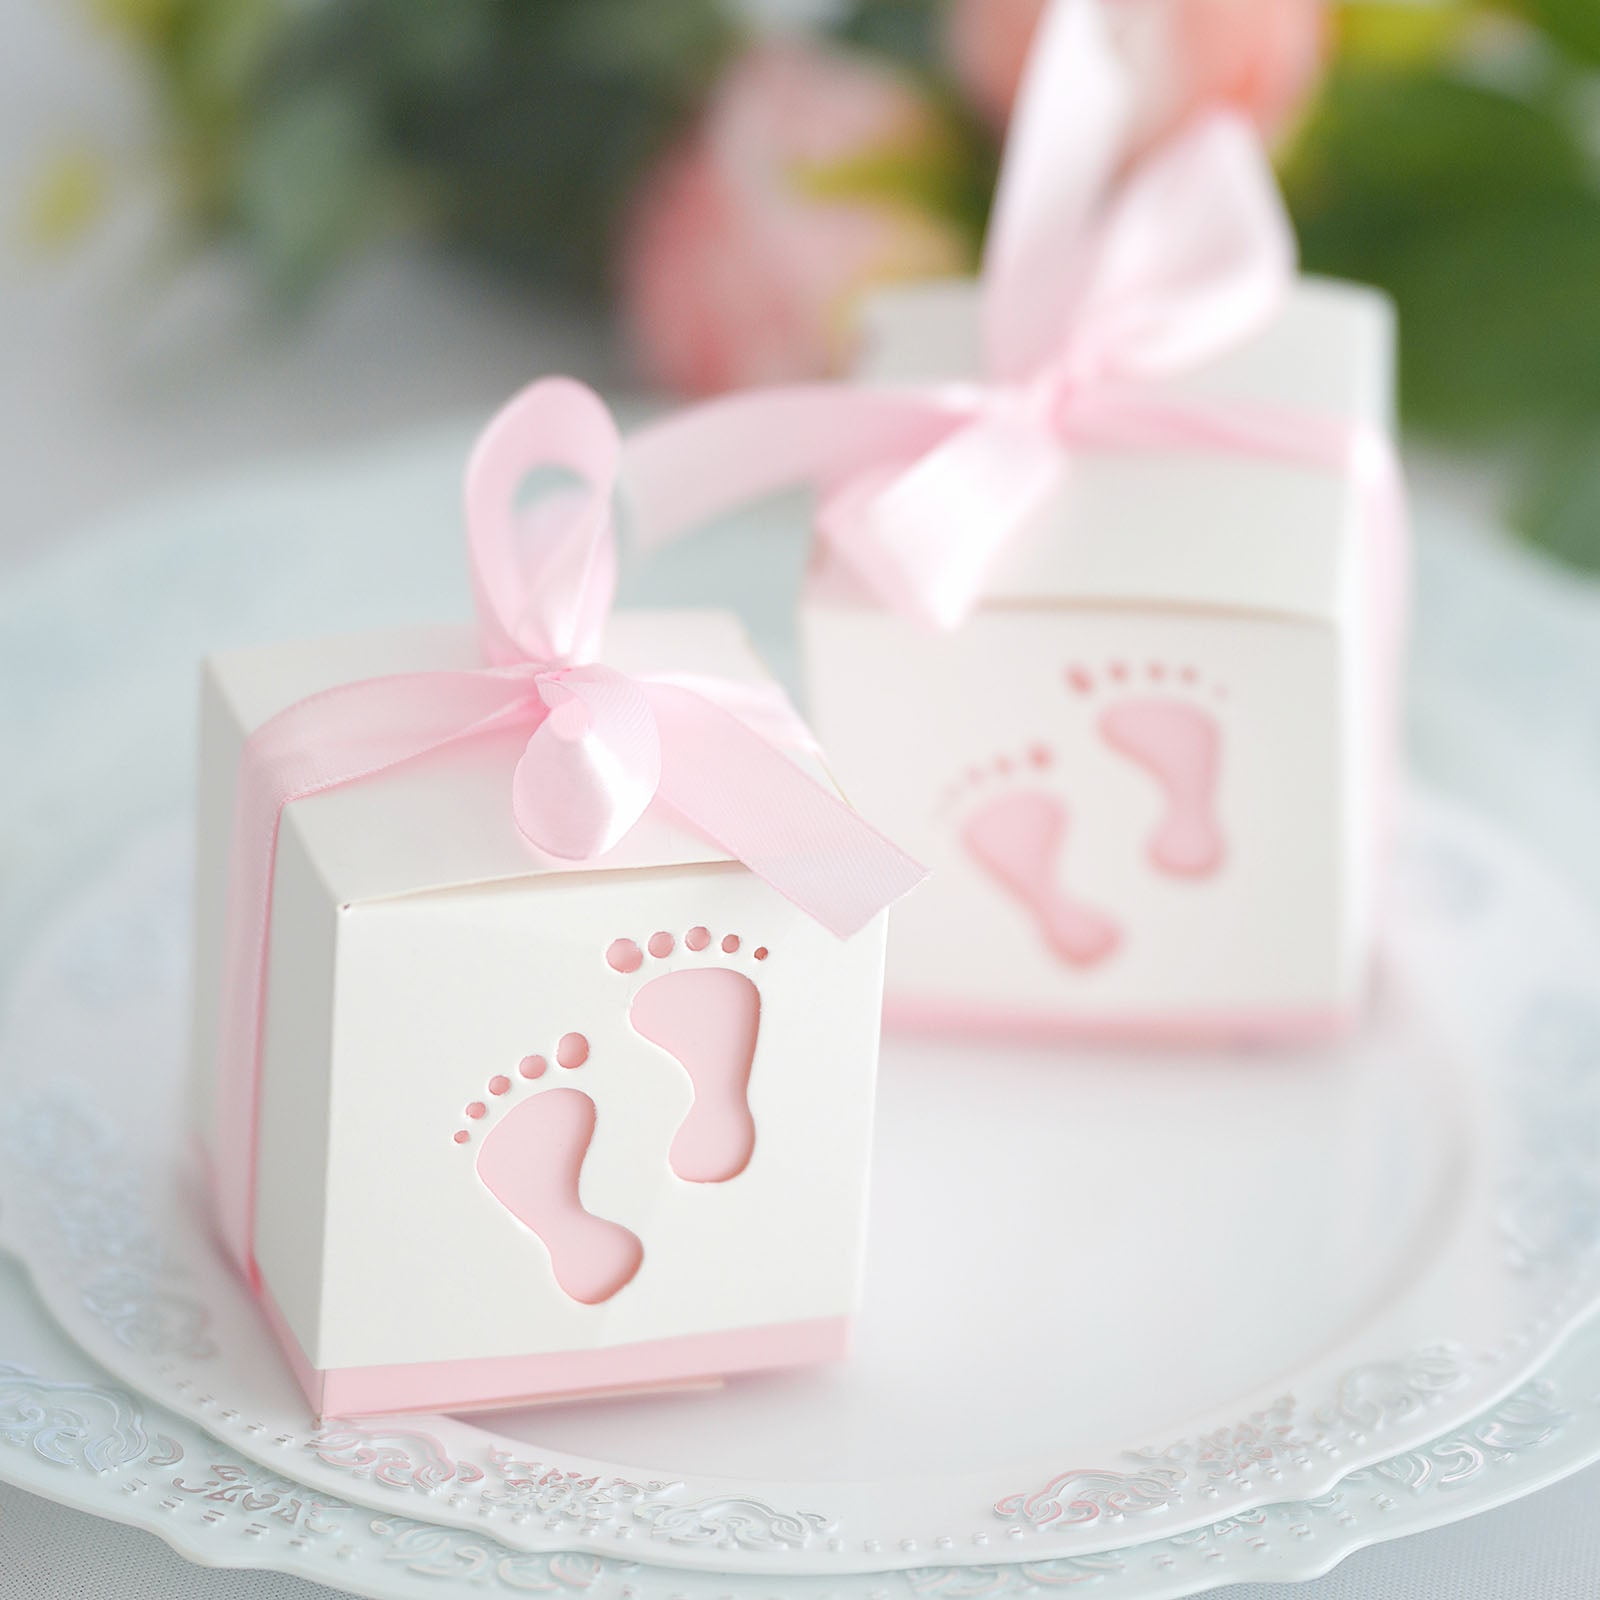 AIXIANG Baby Shower Favors Handmade Little Elephant Scented Soap Favors  with Pink Thanks Gift Box for Girls Baby Shower Favors and Decorations (24  Pack) Little Elephant Girl Baby Shower Favors Soap